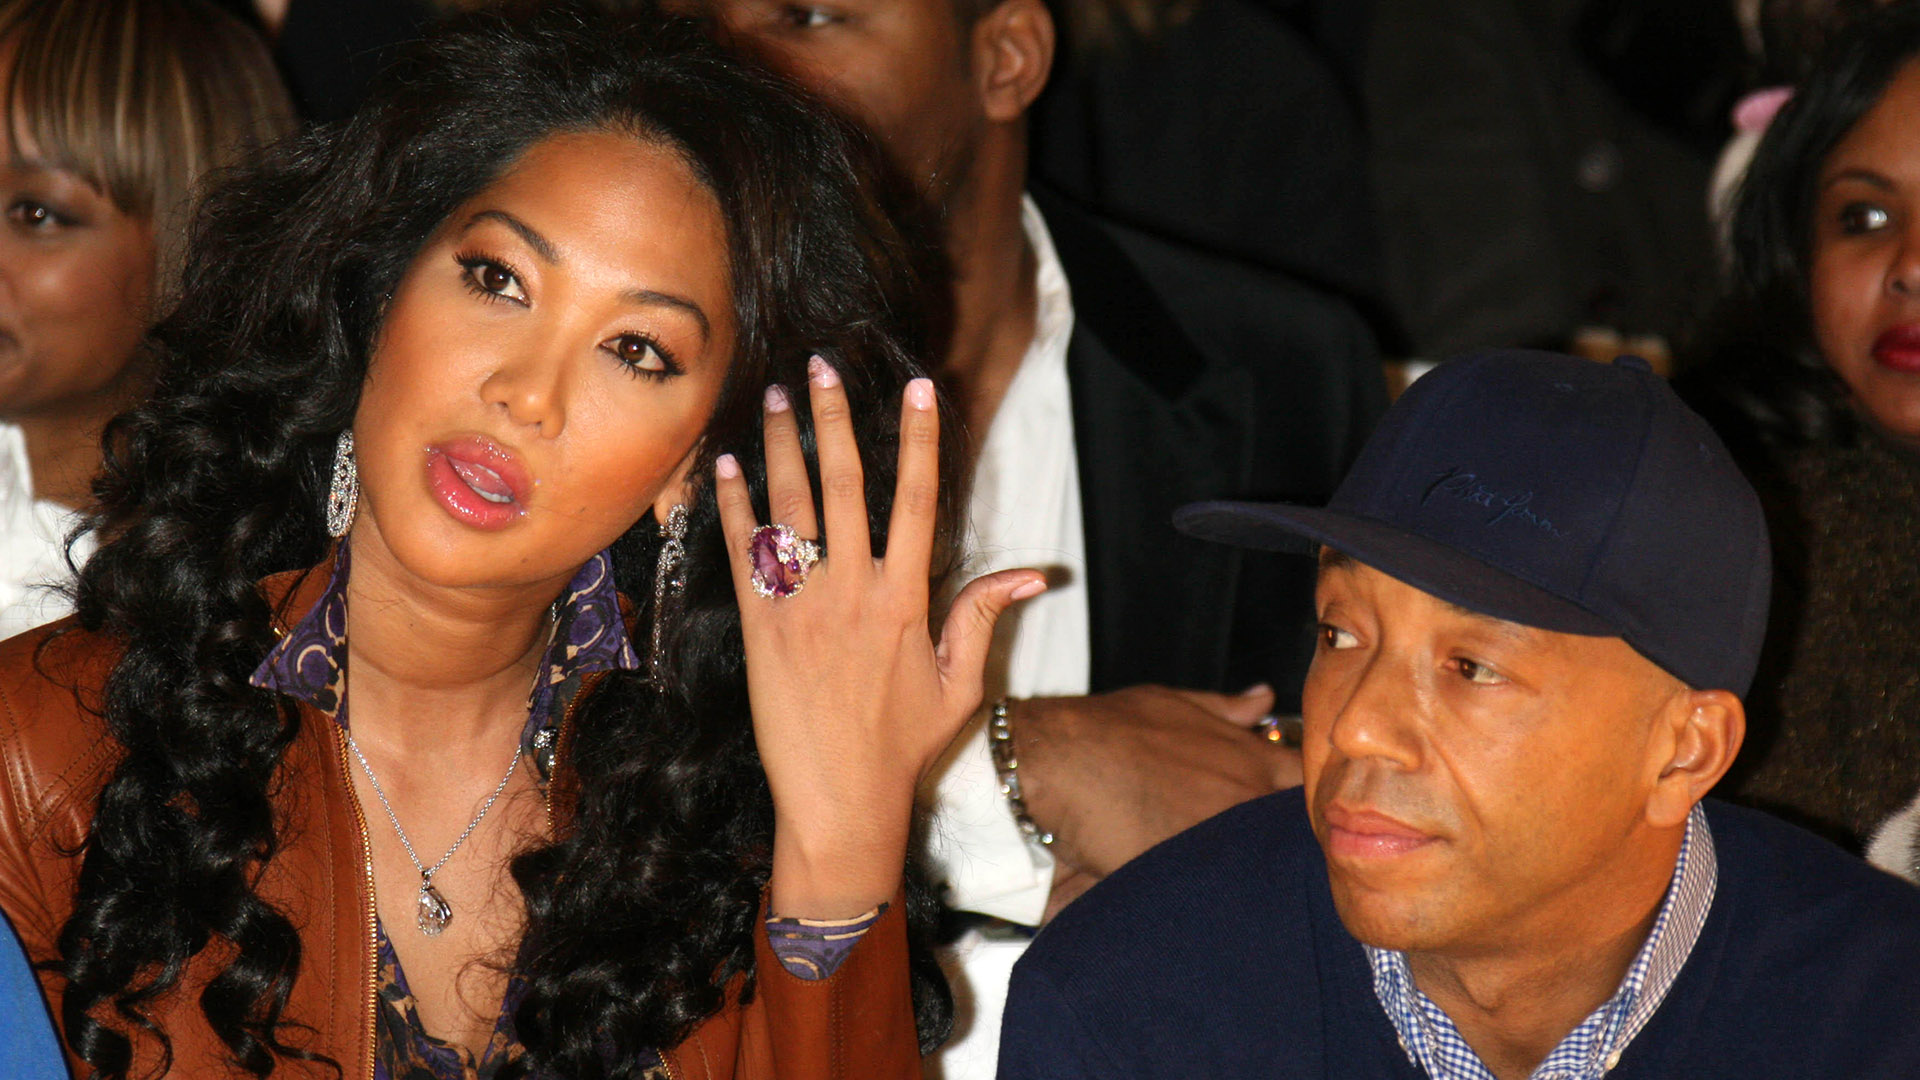 Russell Simmons Family Drama Explained: Harassment, Threats, and Tension, Oh My! 22